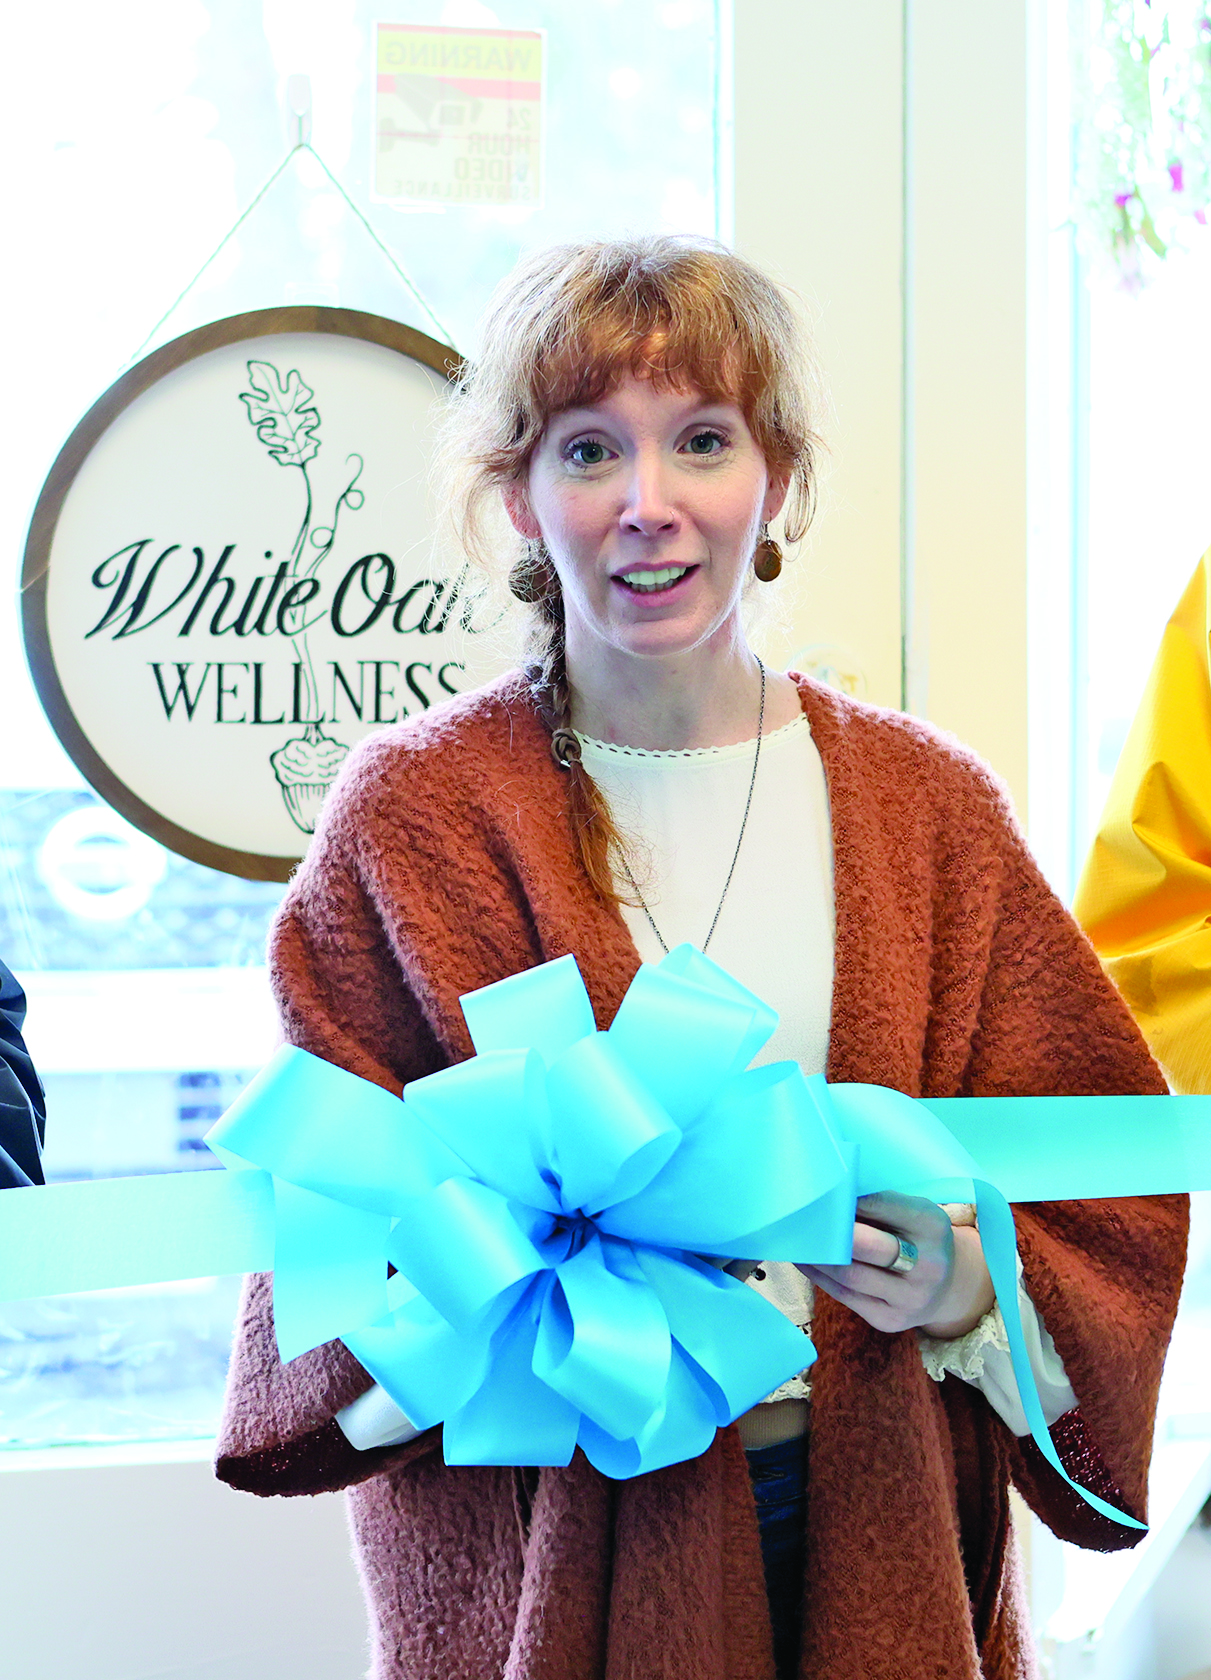 White Oak Wellness Brings Holistic Healthcare and Home School Support to South Ashland